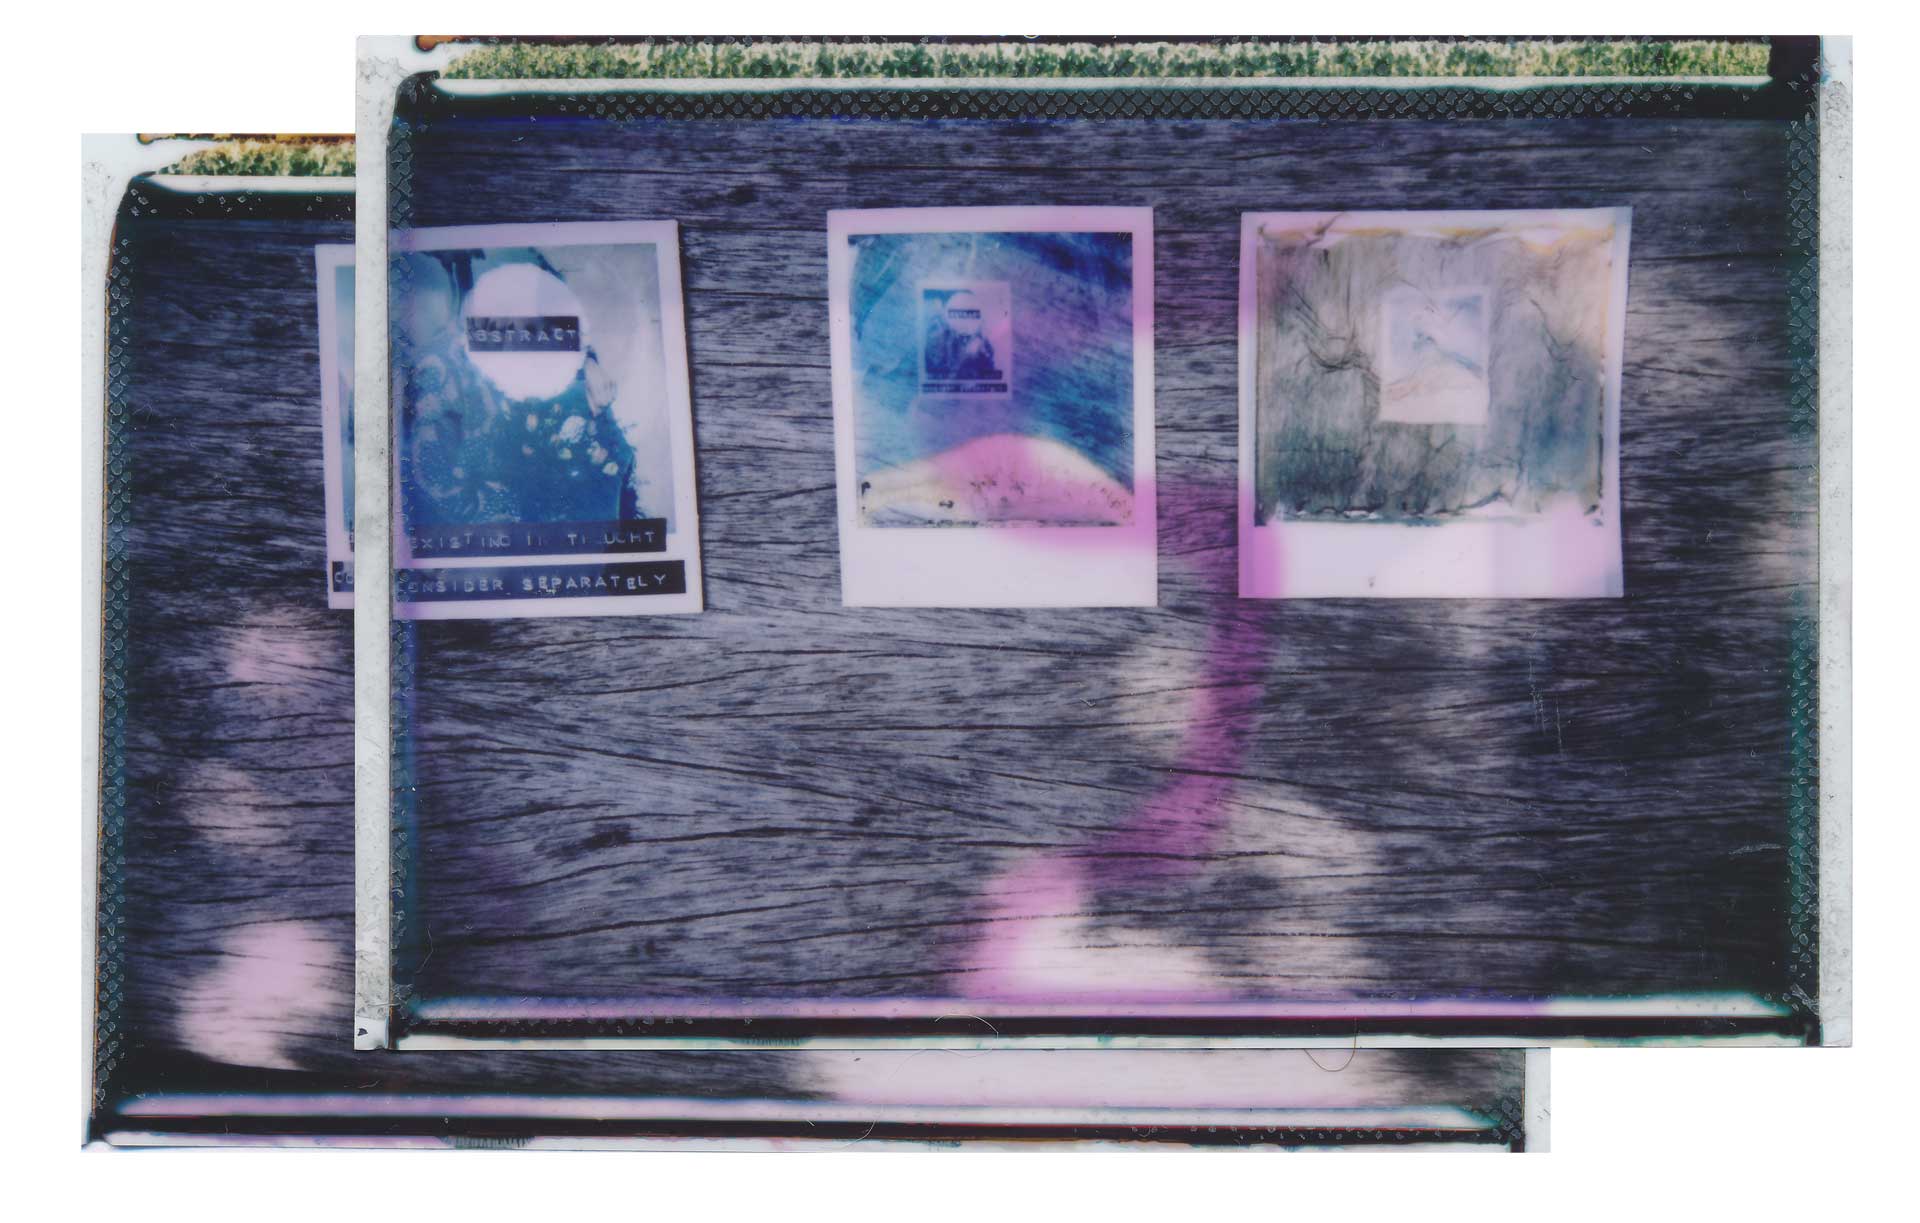 Search For Meaning | Fuji Instax Wide 210 | Fuji Instax Wide | Multimedia Collage Photographed On Instax Wide Film And Then Manipulated | Kay Adams